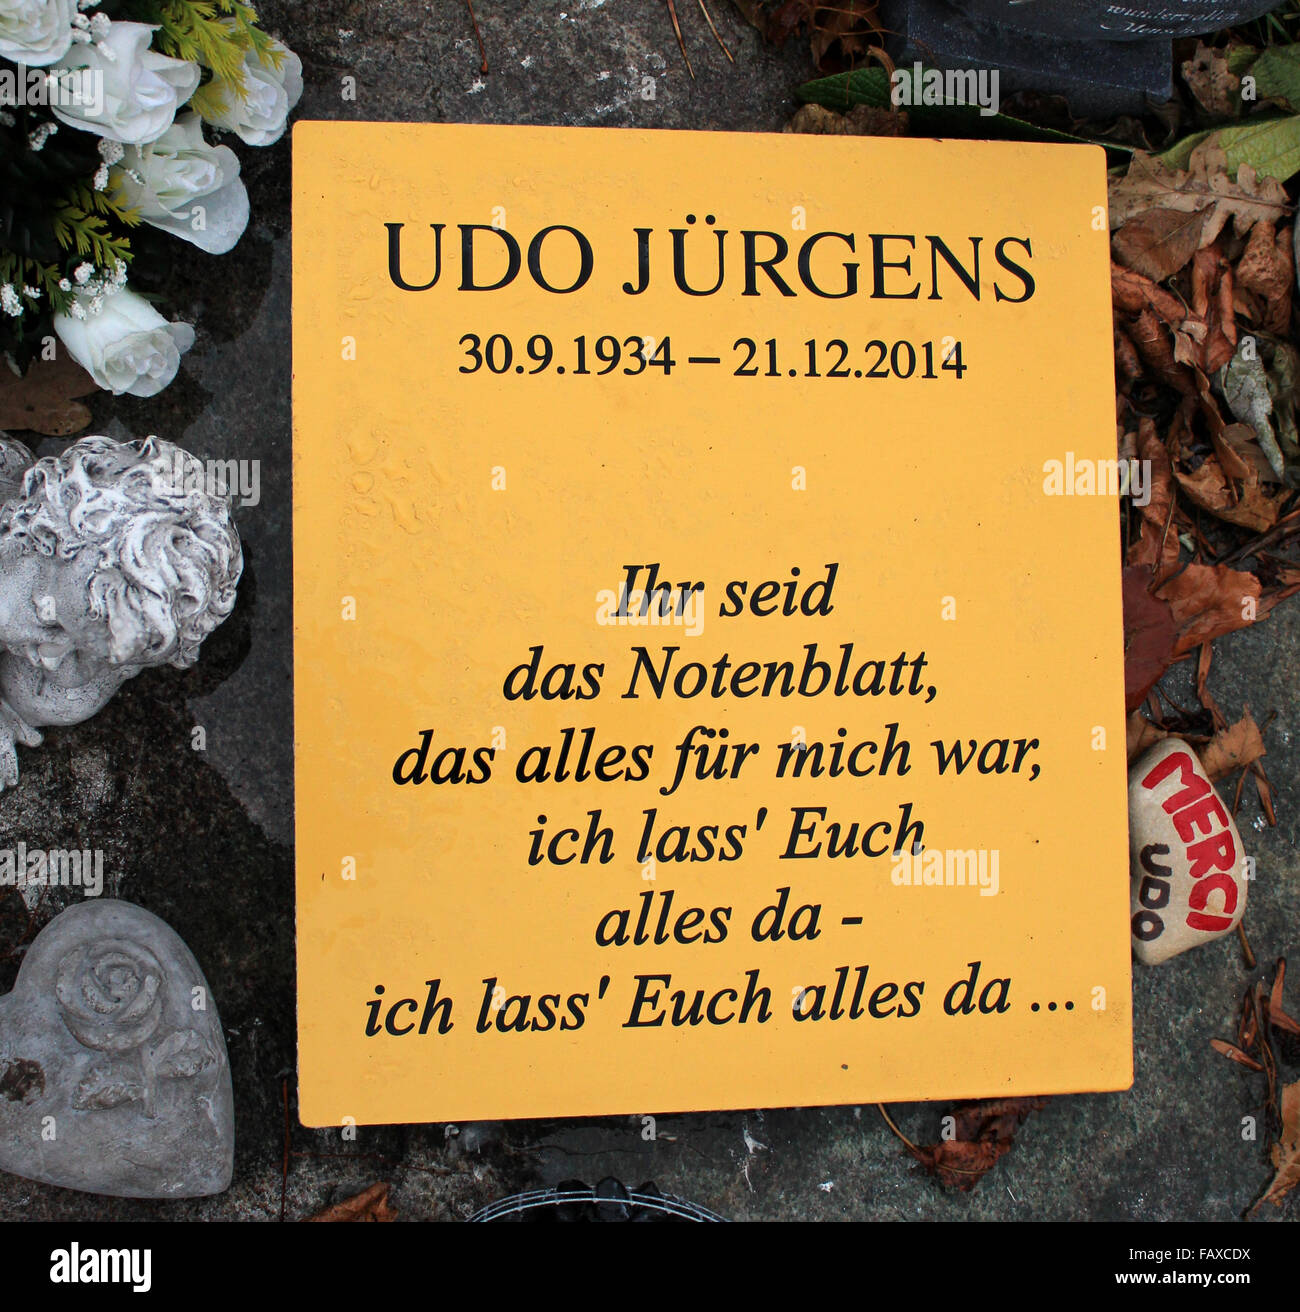 A wrong lyrics was engraved on singer Udo Jürgens grave plate. The correct lyric is: 'Ich lass' Euch alles – ich lass' Euch alles da' The grave plate was replaced two times by his brother Manfred Bockelmann.  Featuring: Udo Jürgens Where: Vienna, Austria Stock Photo